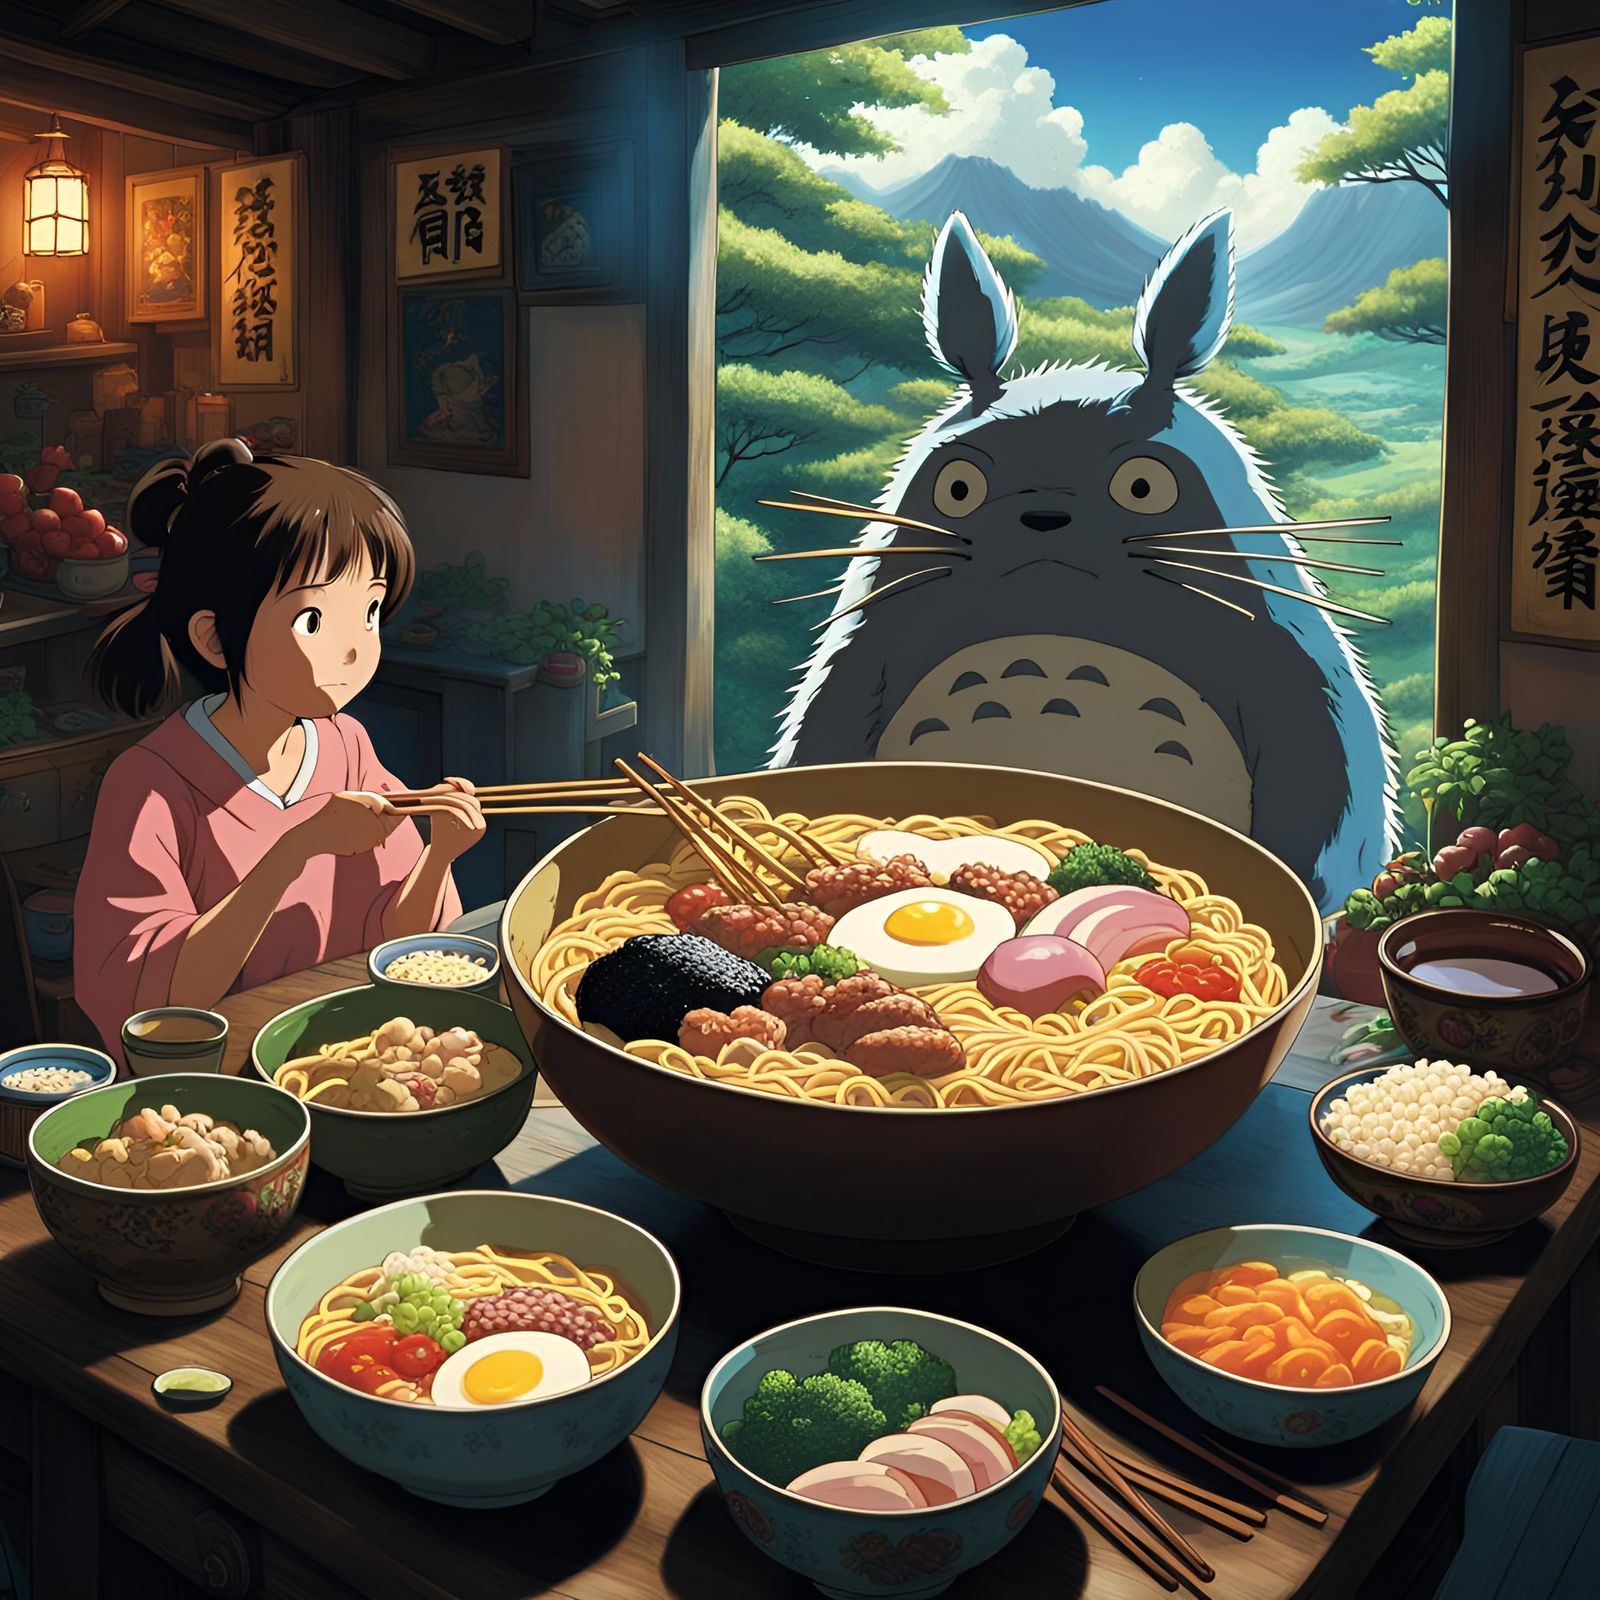 Chihiro and Totoro sharing a meal